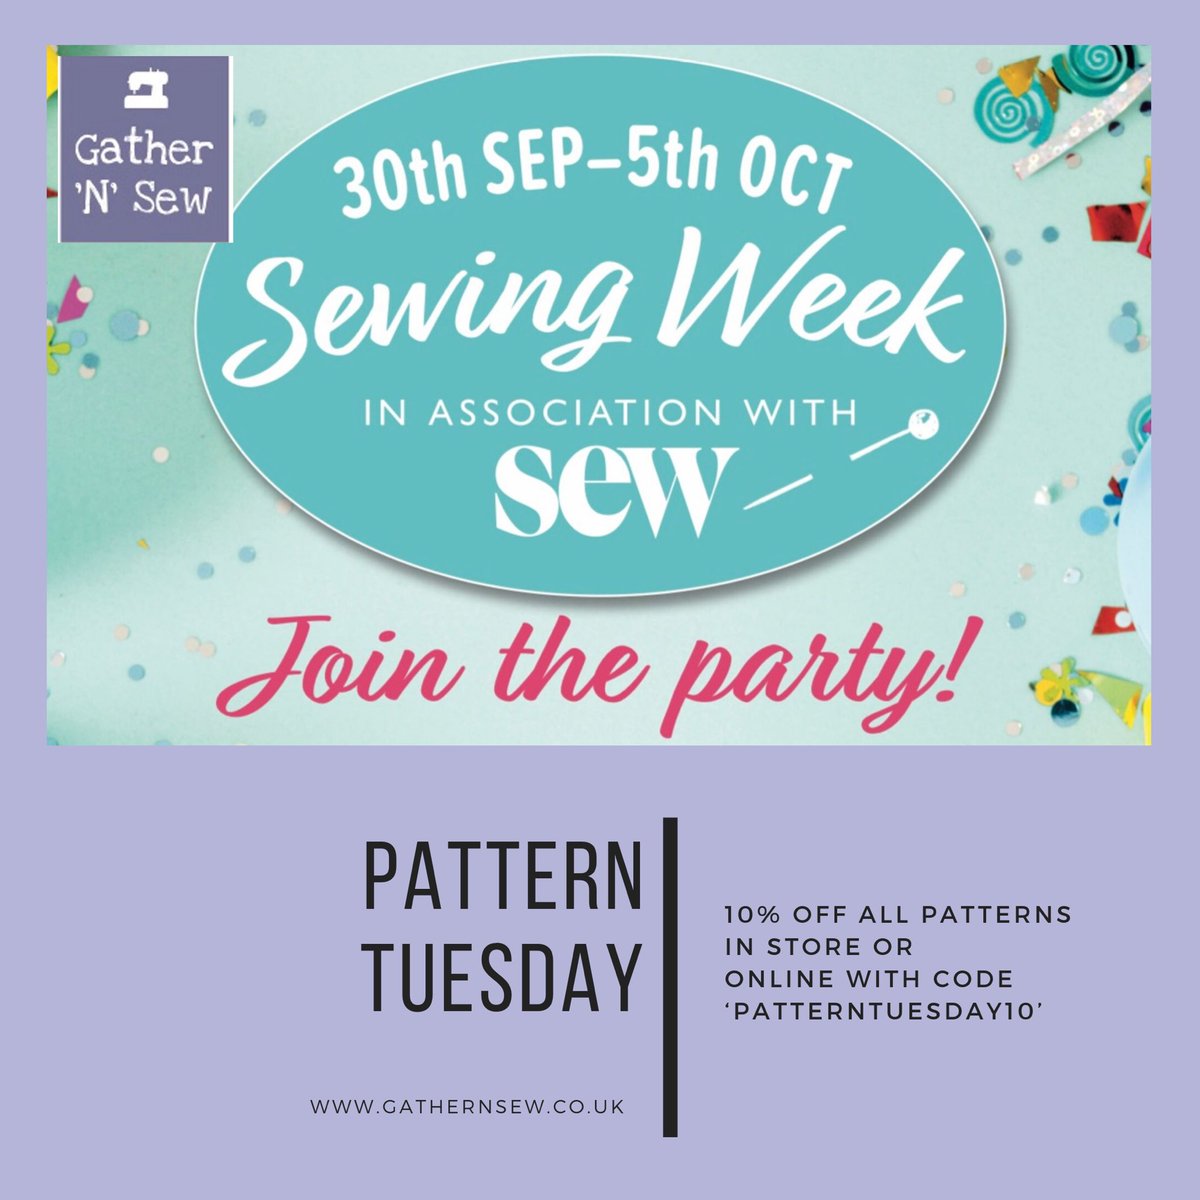 Today is Pattern Tuesday and all day today we will be giving you 10% off all of our patterns in the shop and online if you use the code ‘PATTERNTUESDAY10’. We have so many wonderful patterns to inspire you so happy shopping 🛍 #sewingweek #sewingweek2019 #patterntuesday @SewHQ